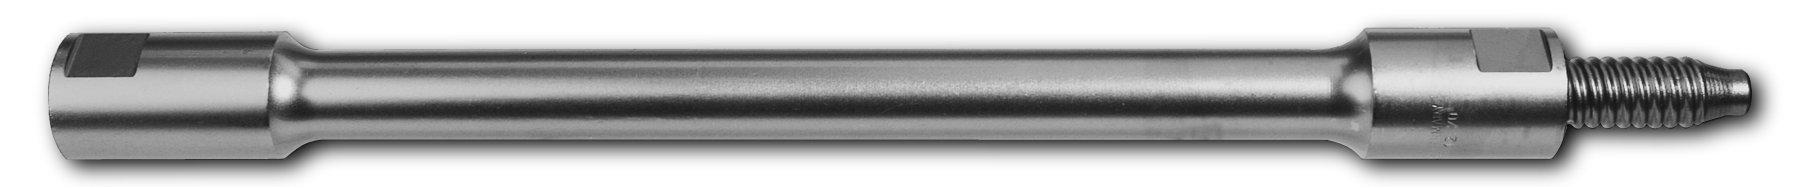 powers fastening innovations 00590 centering bit, 15/32-inch by 6-inch, 1 per box